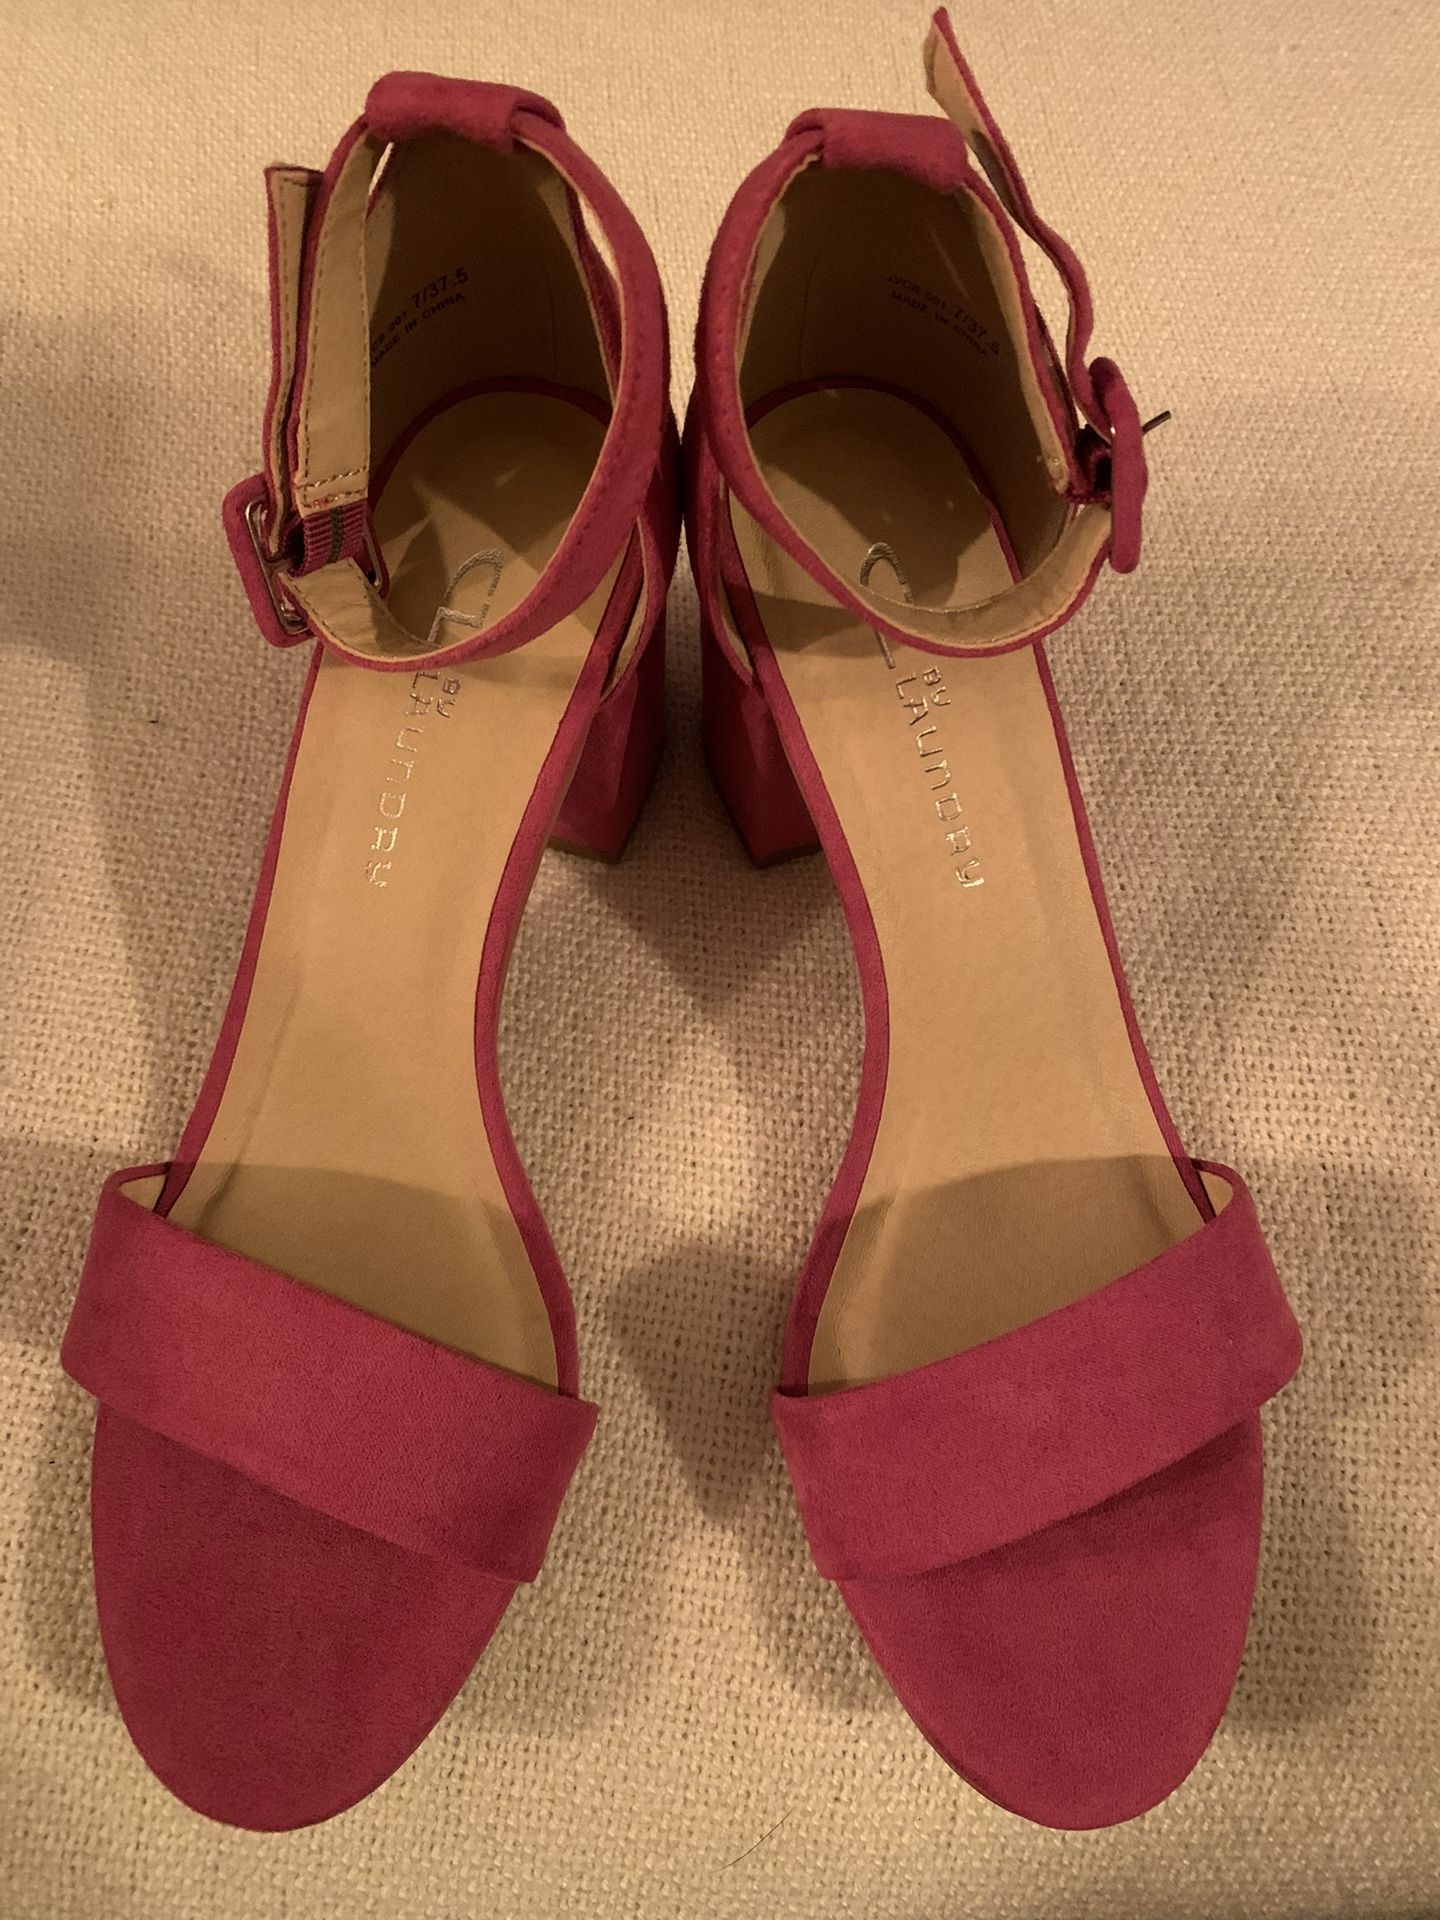 Pink heels size 7 CL by Laundry